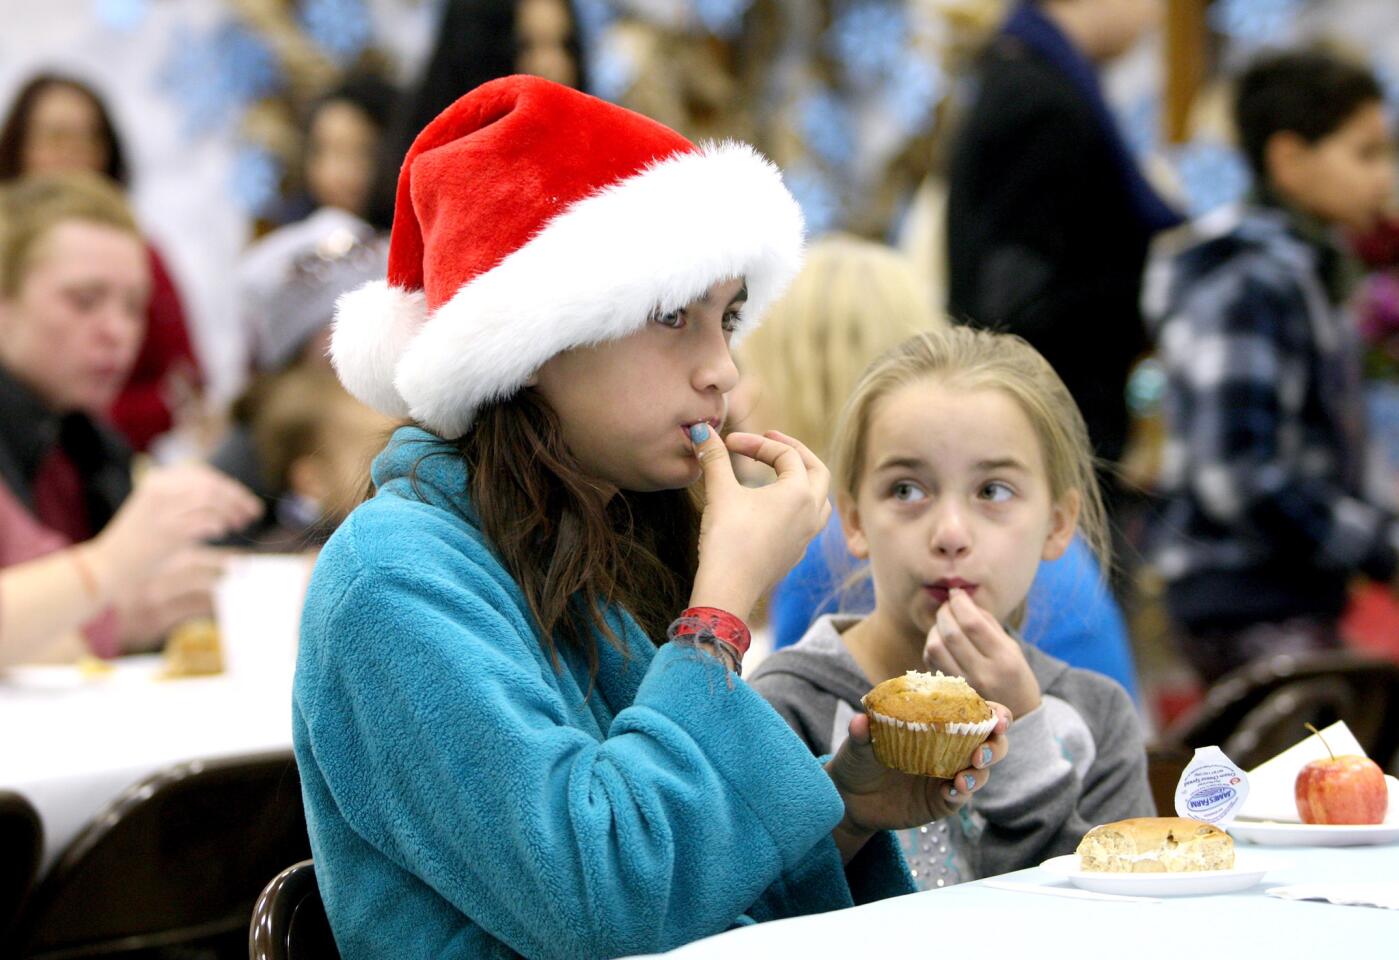 Lexi Arandia, 10 of La Cañada Flintridge, 10, left, and Ashley Fostrey, 9 of Montrose, right, enjoy a muffin and juice before heading out to meet Santa Claus and grabbing a toy or two at the Crescenta Valley Sheriff Station's annual Toy and Food Drive at Crescenta Valley Park in La Crescenta on Saturday, Dec. 19, 2015.